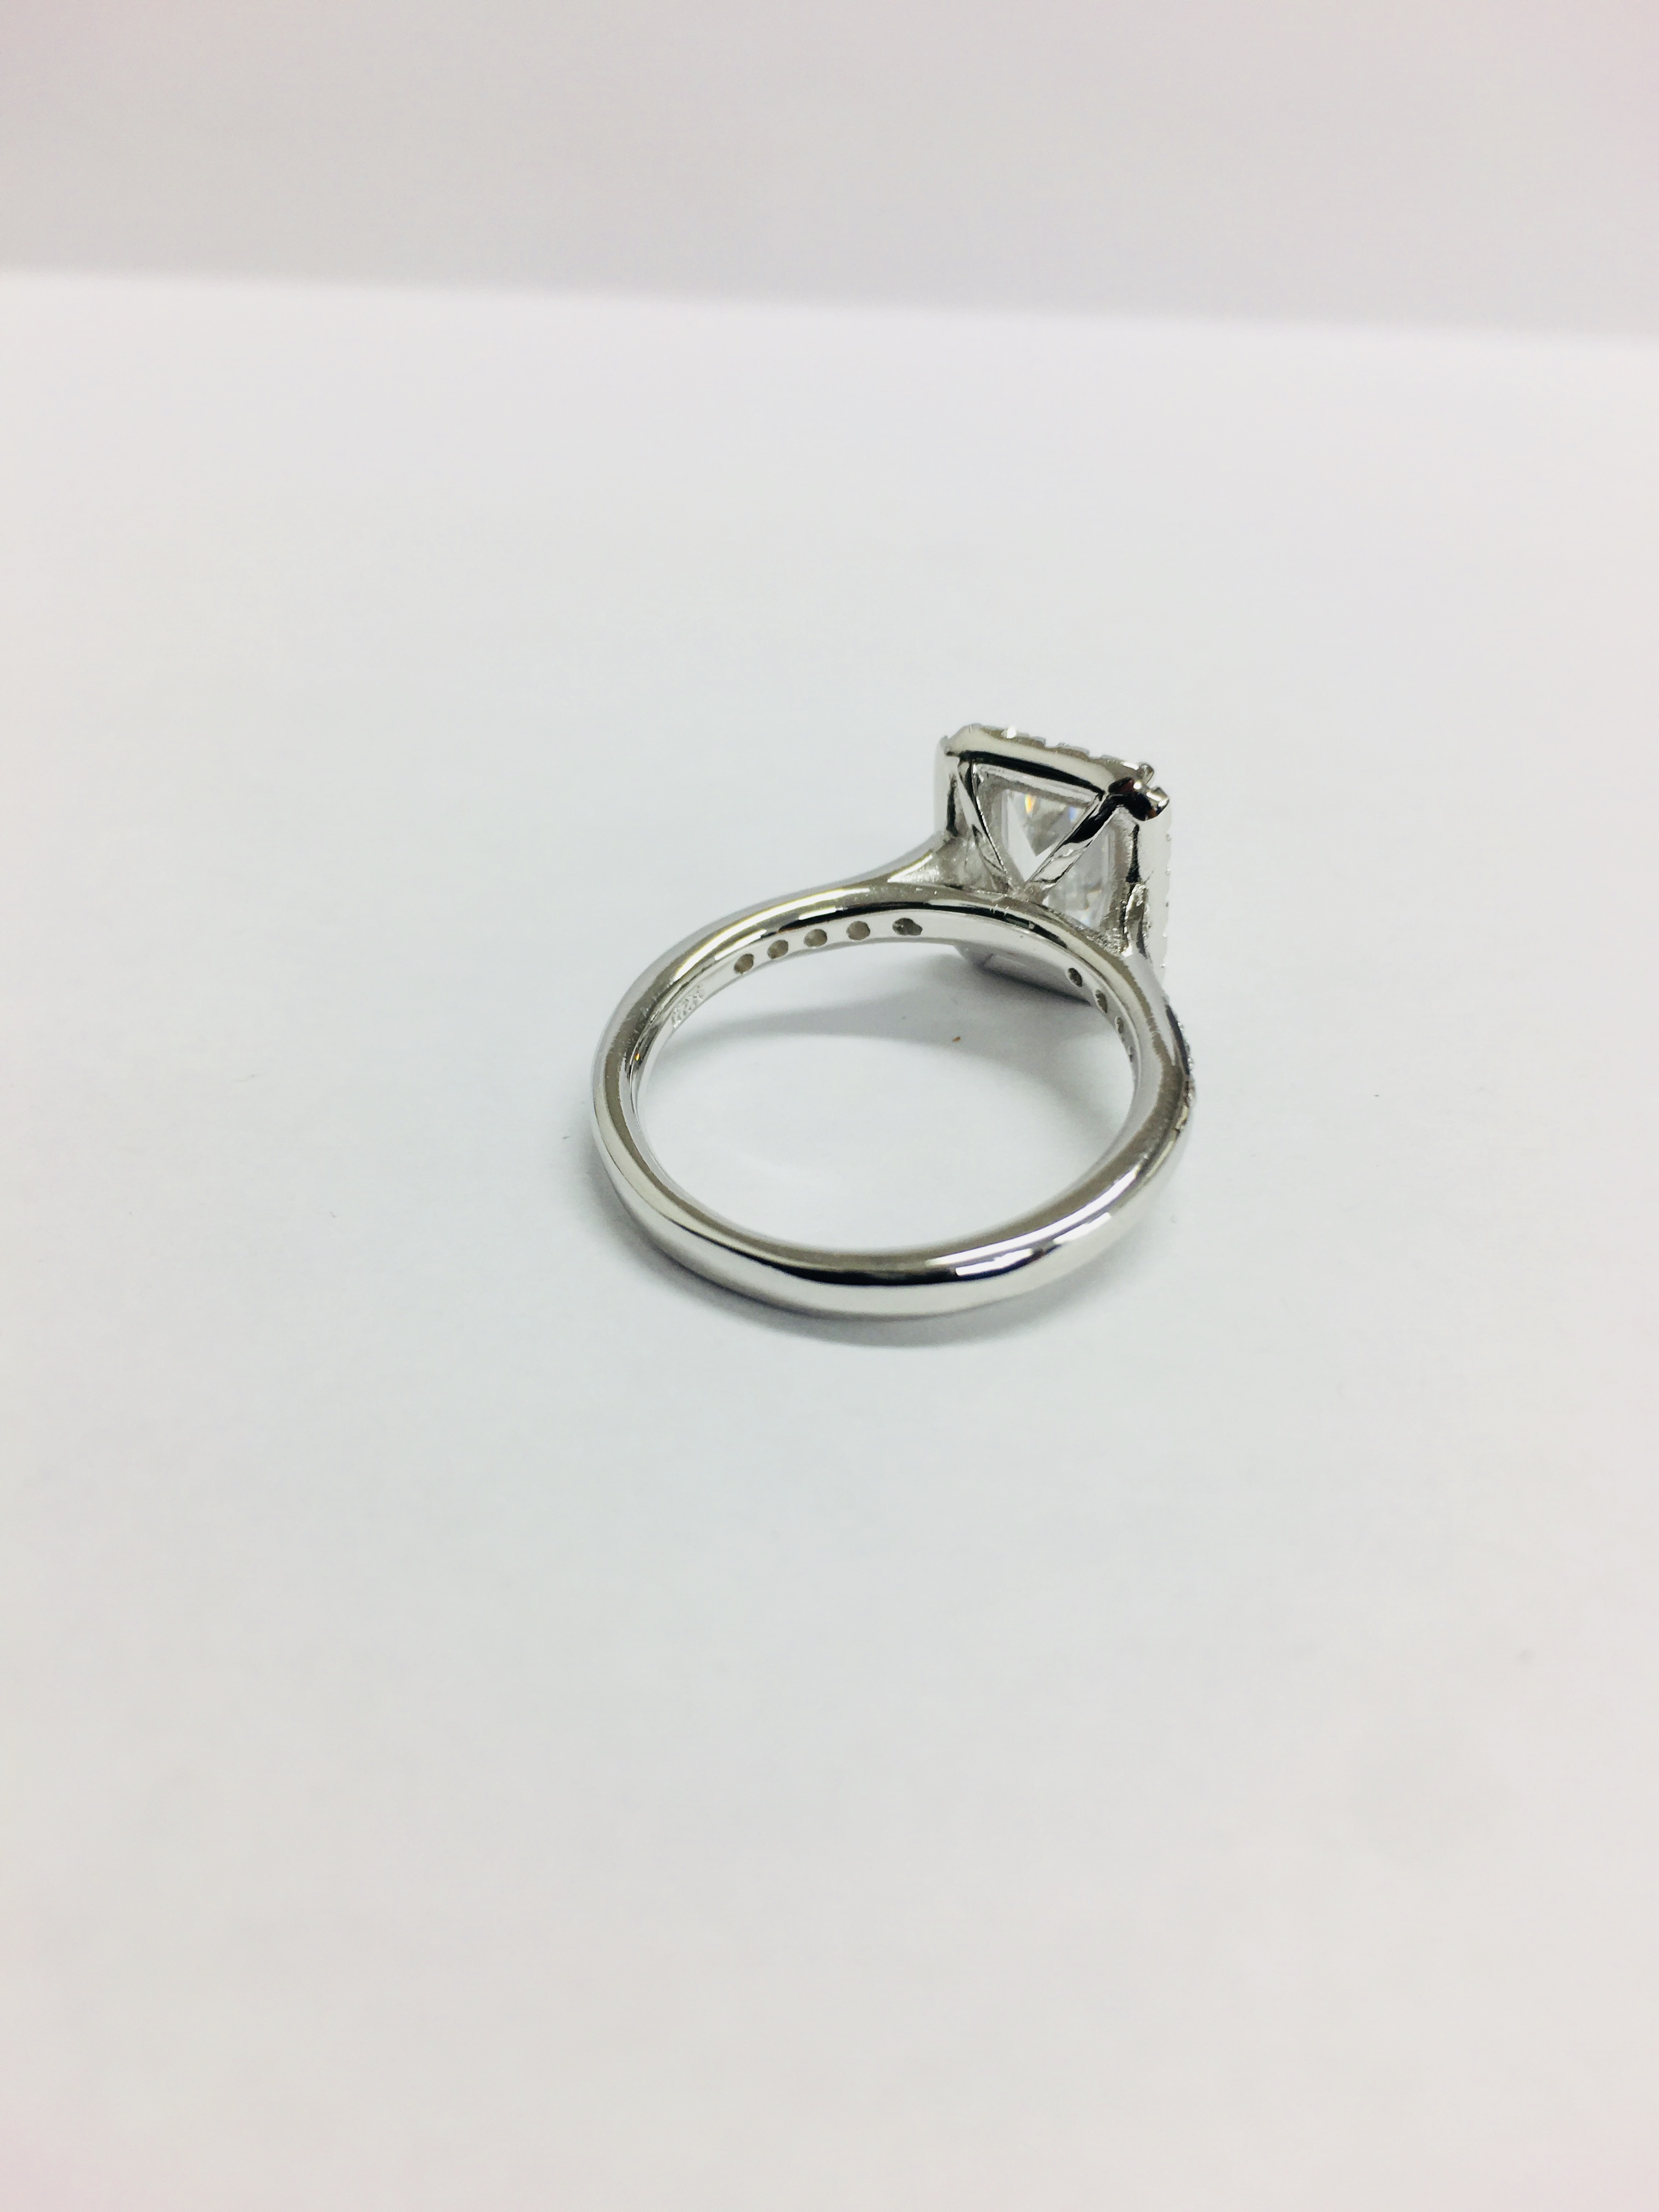 1.2ct diamond solitaire ring set with an emerald cut diamond - Image 6 of 8